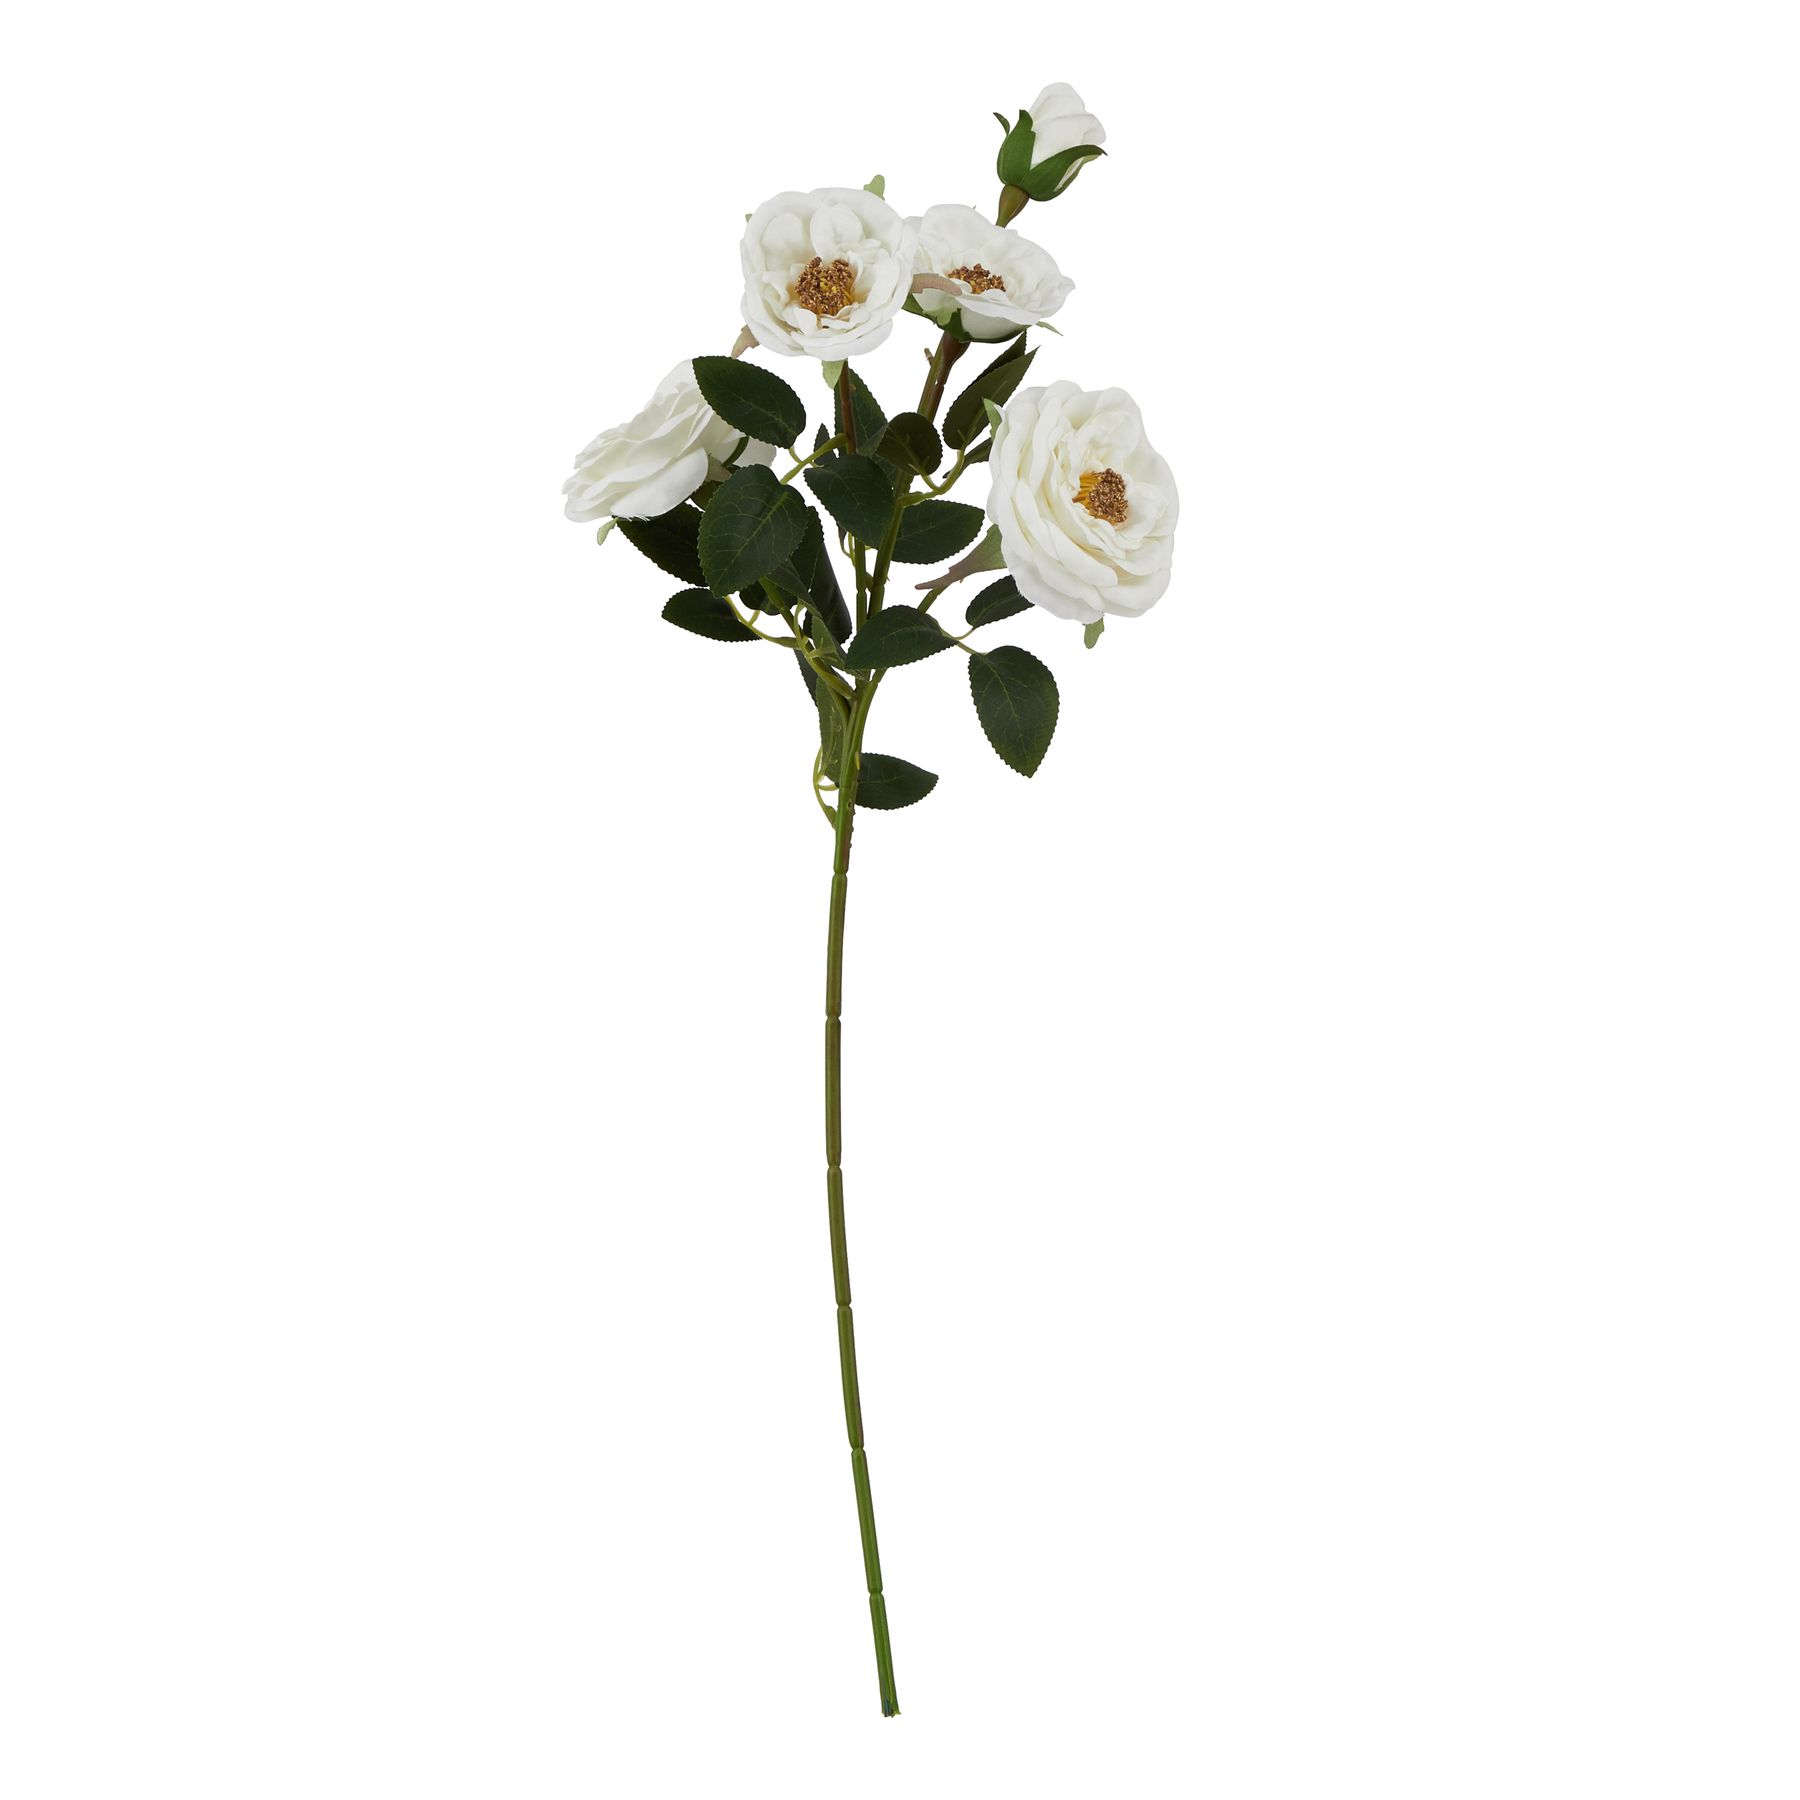 The Natural Garden Collection White Hedge Rose Stem - Image 1